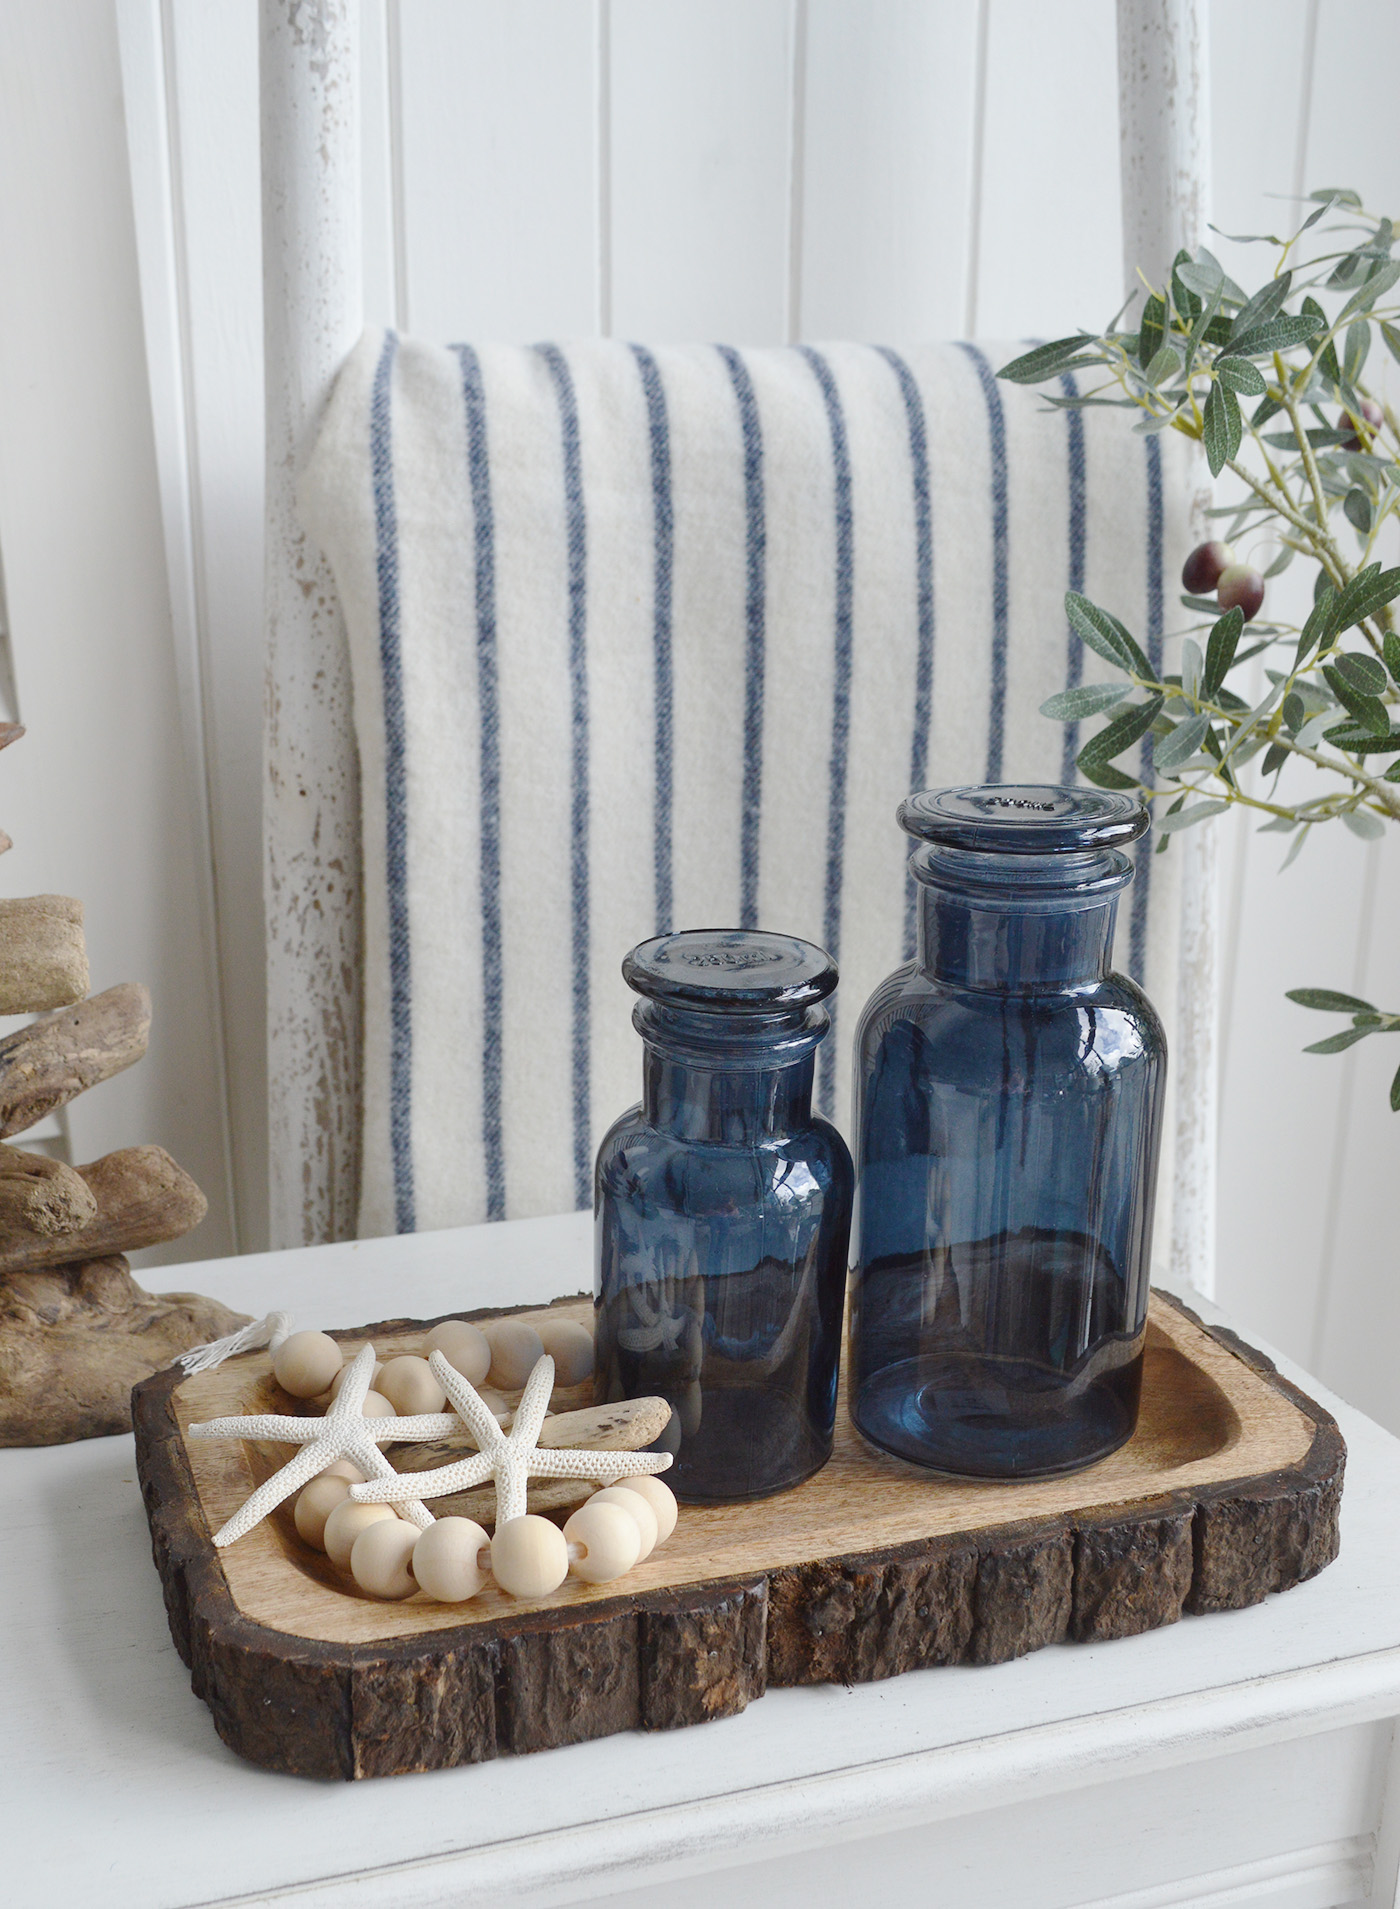 Decorative Blue glass bottles on the tree trunk rustic tray for New England style living in coastal and country homes and furniture